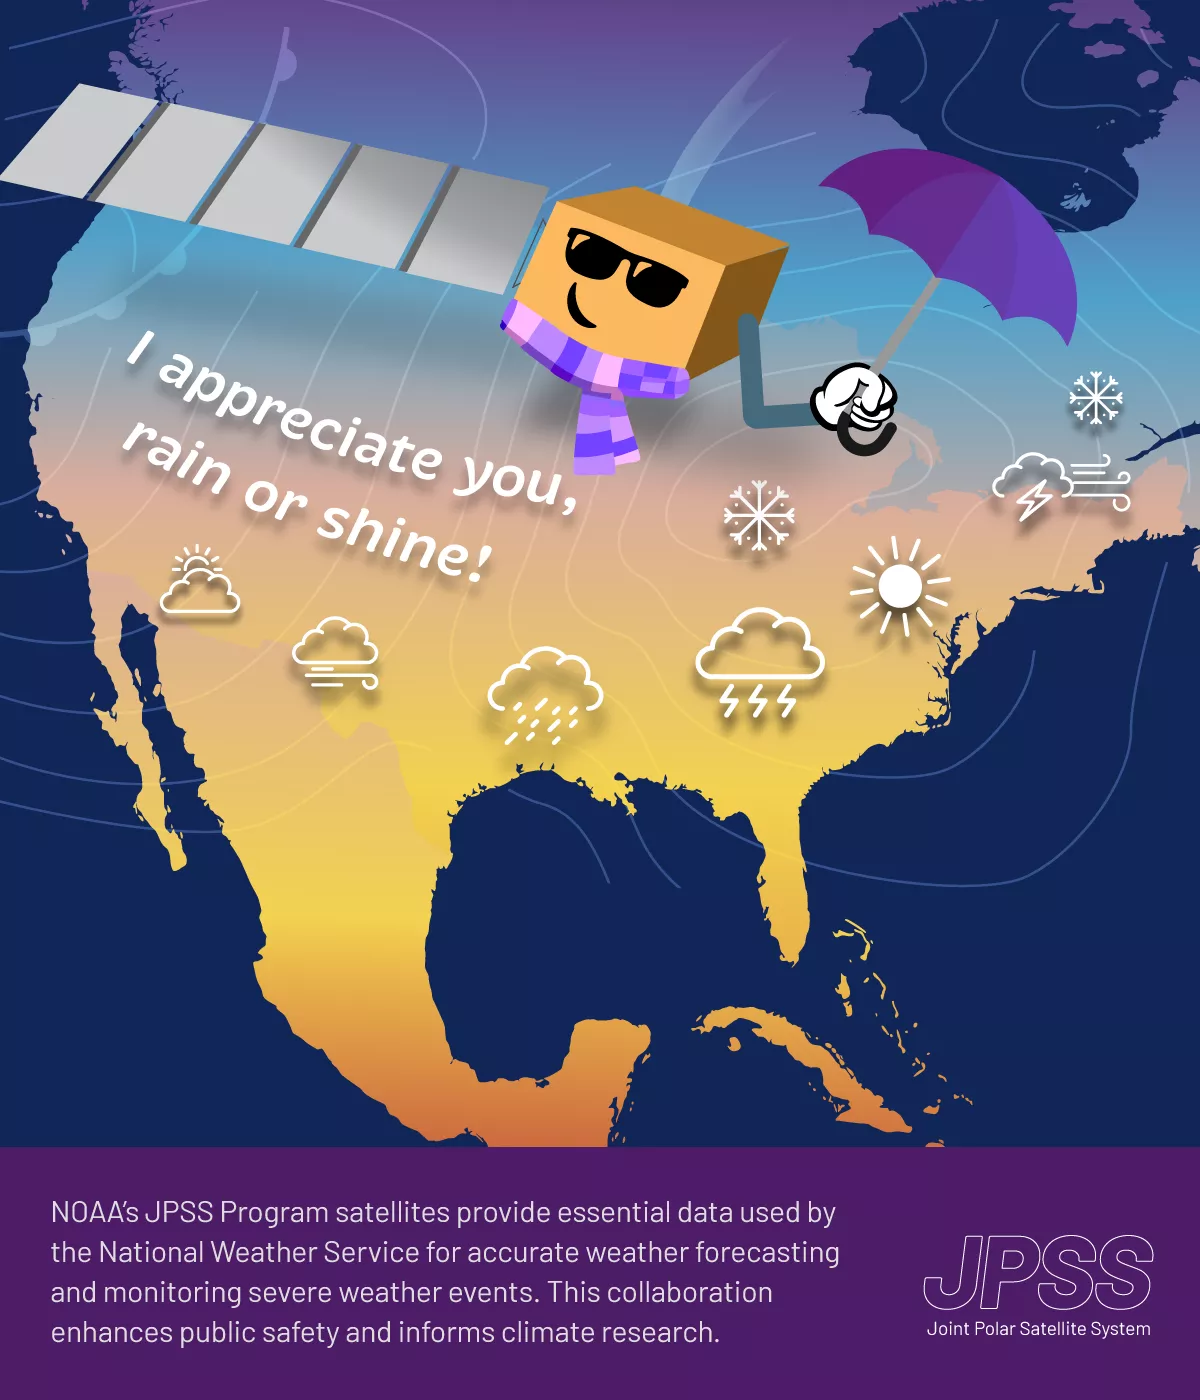 A Valentine’s Day card showcasing an animated JPSS satellite with a smiling face and sunglasses, wrapped in a purple scarf, over a gradient map of the Northern Hemisphere highlighting North America. The satellite playfully holds a purple umbrella.